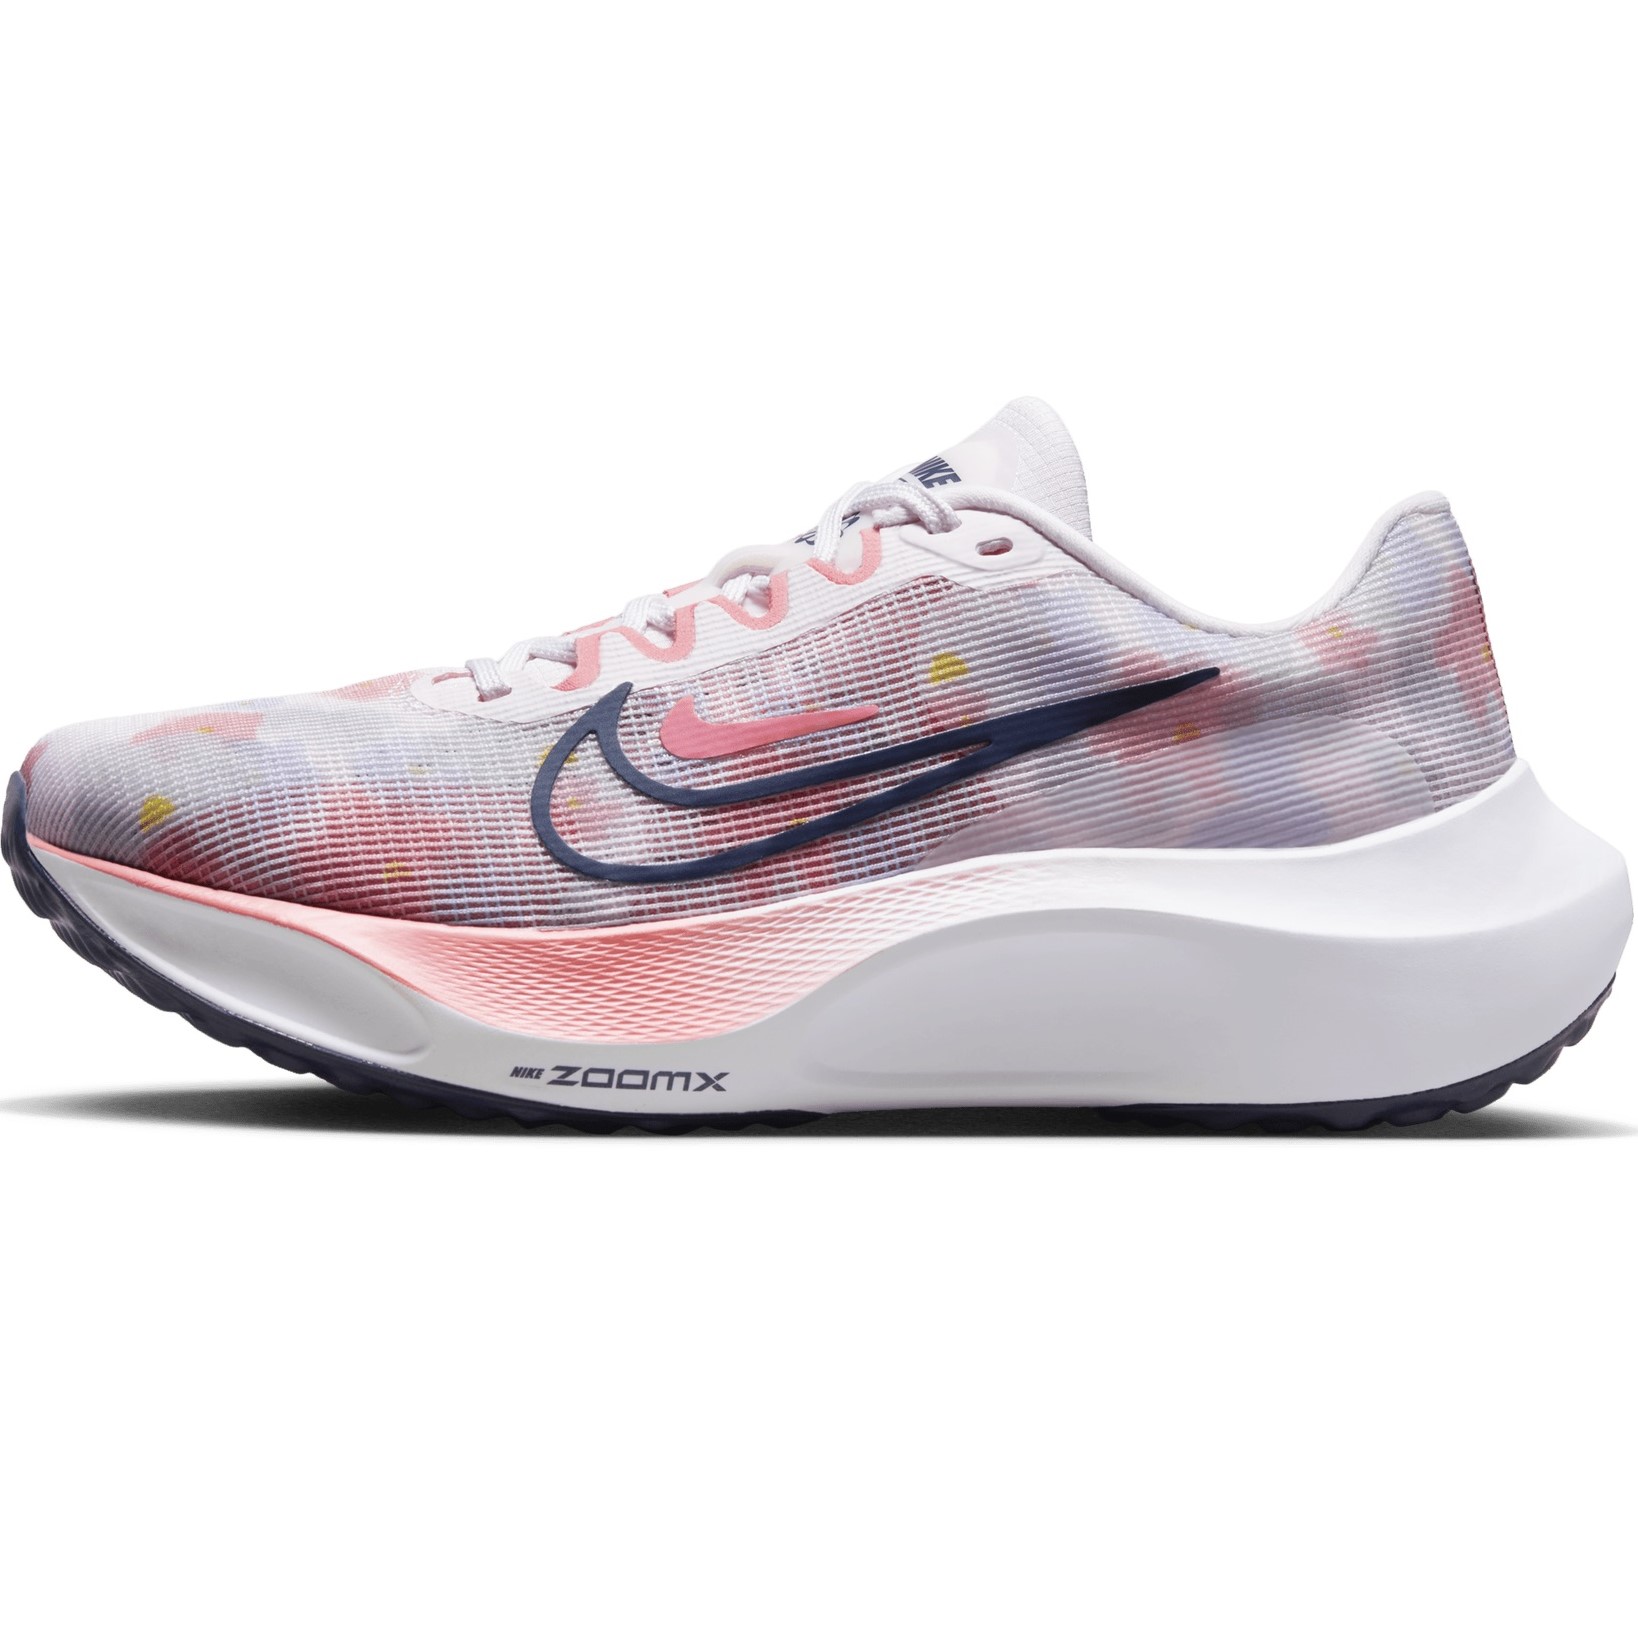 GIÀY NIKE NỮ ZOOM FLY 5 PREMIUM WOMEN ROAD RUNNING SHOES PEARL PINK DV7894-600 2